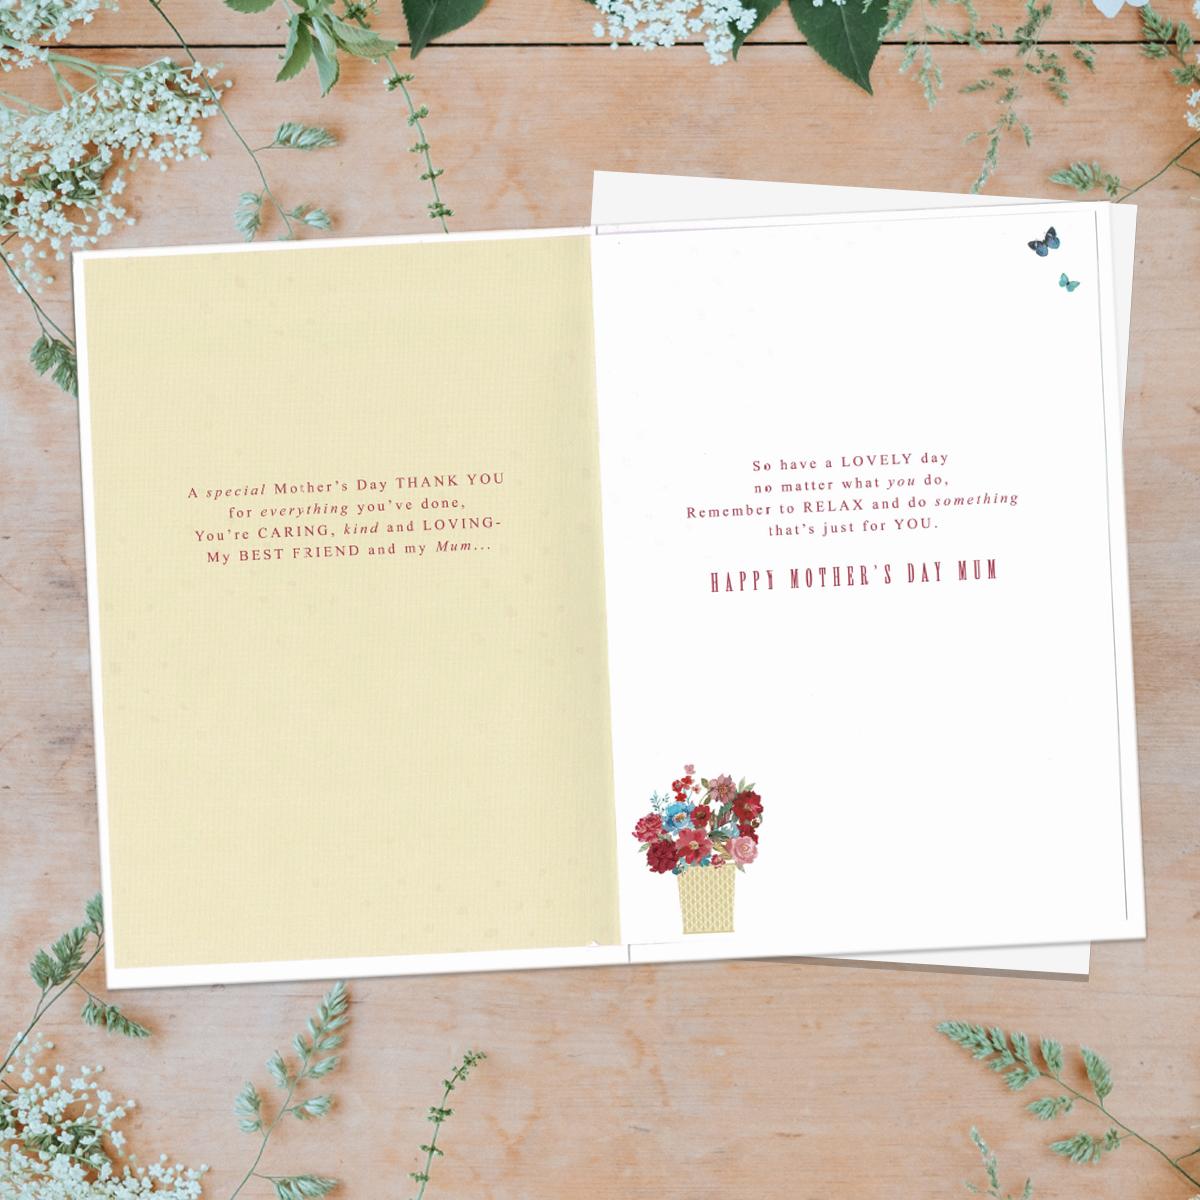 Colour Printed Insert With Images And Two Pages Of Heartfelt Verse